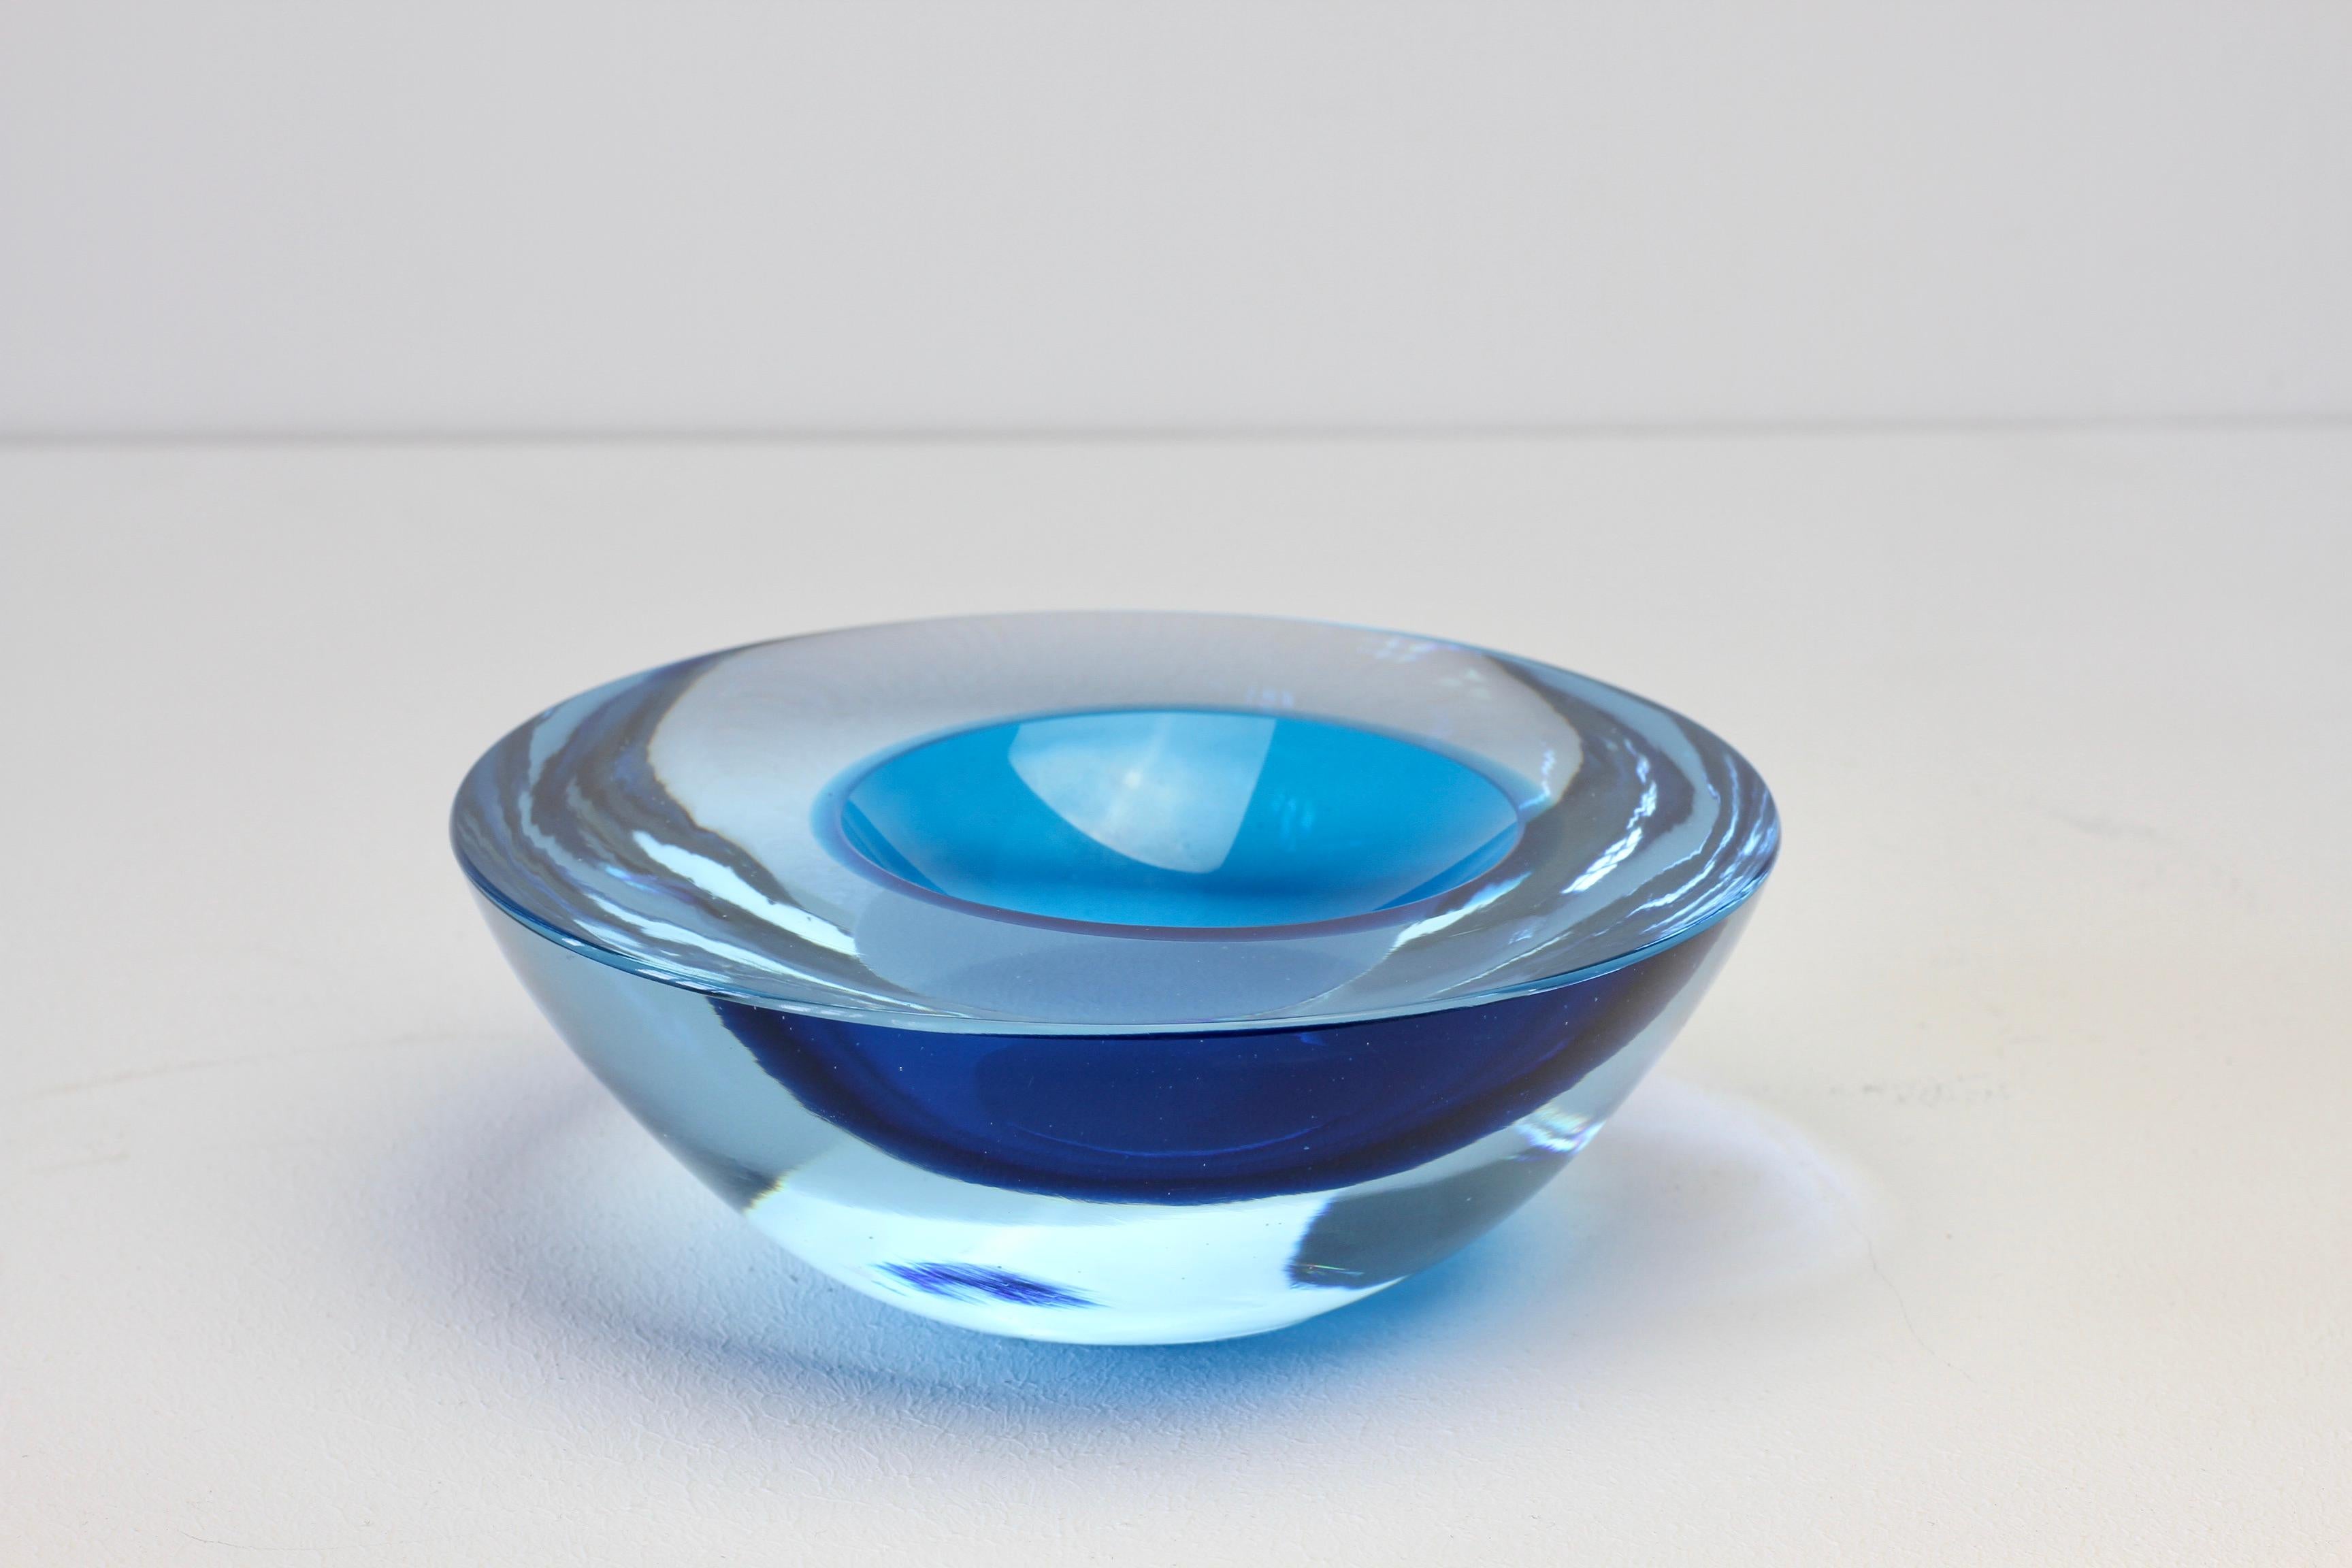 Large Cenedese Italian Asymmetric Blue Sommerso Murano Glass Bowl, Dish, Ashtray For Sale 8